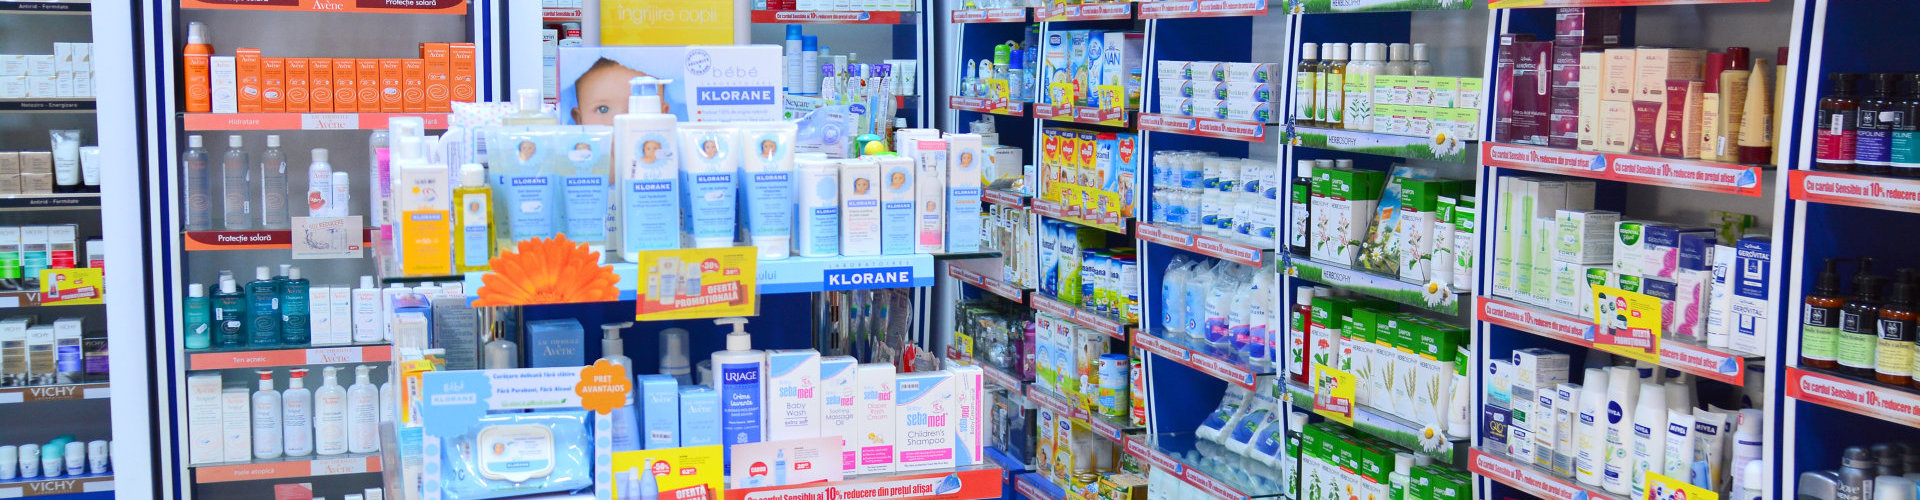 pharmacy shelves full of products on display